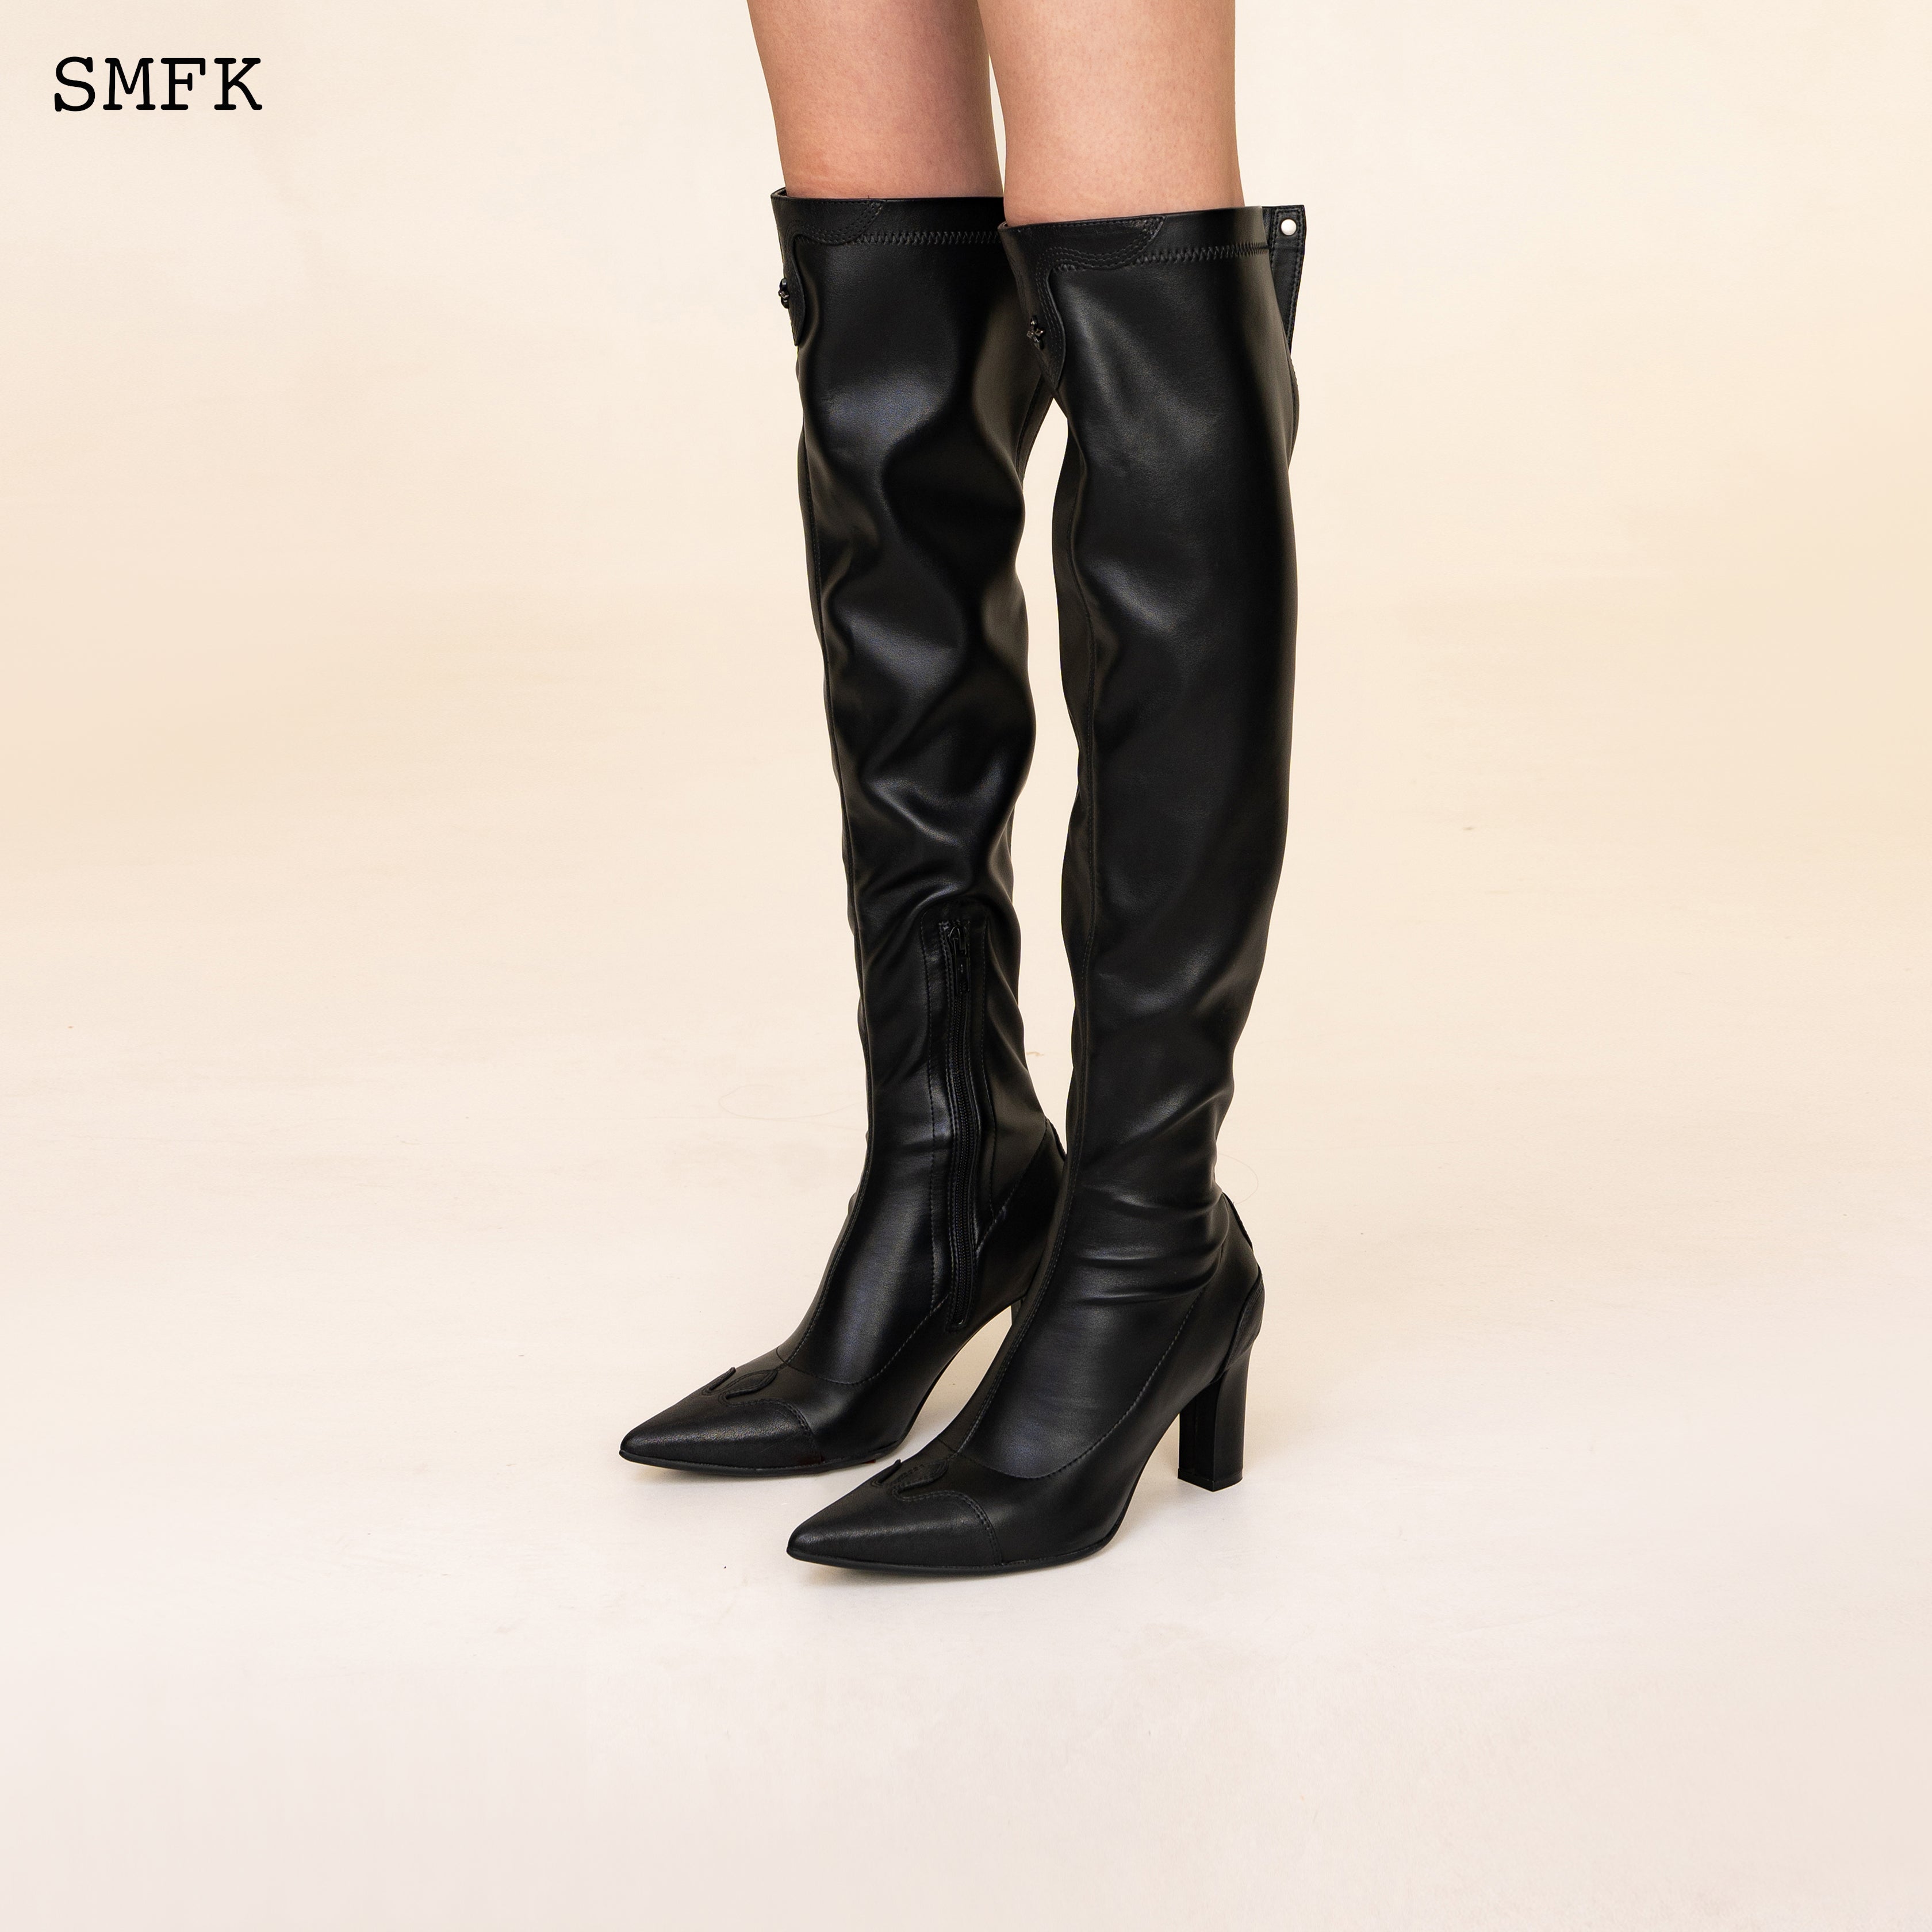 Compass Cross Black Leather over-the-knee Boots